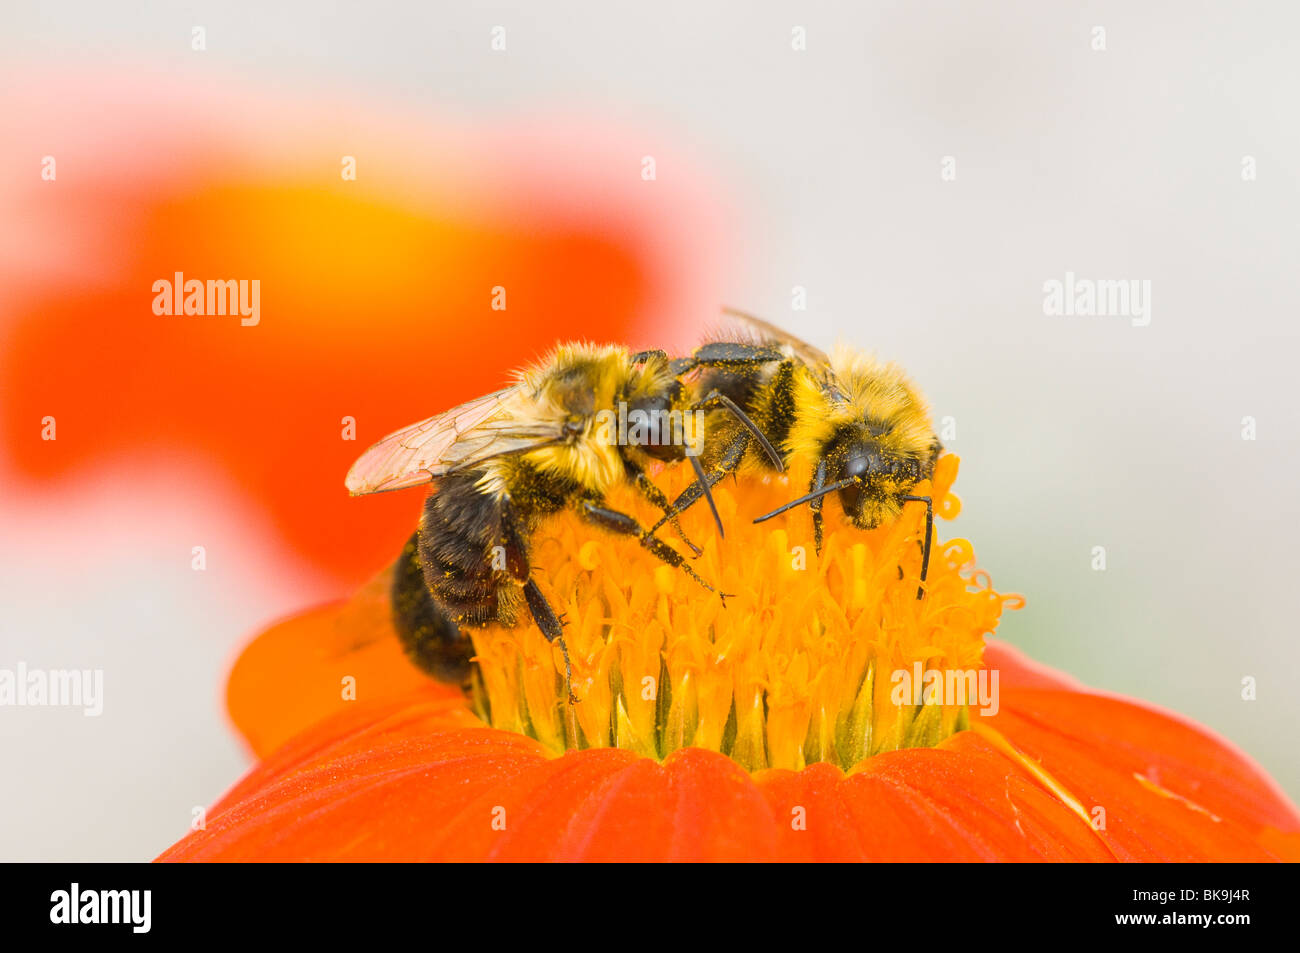 Three Carpenter Bees on Mexican Sunflower Stock Photo